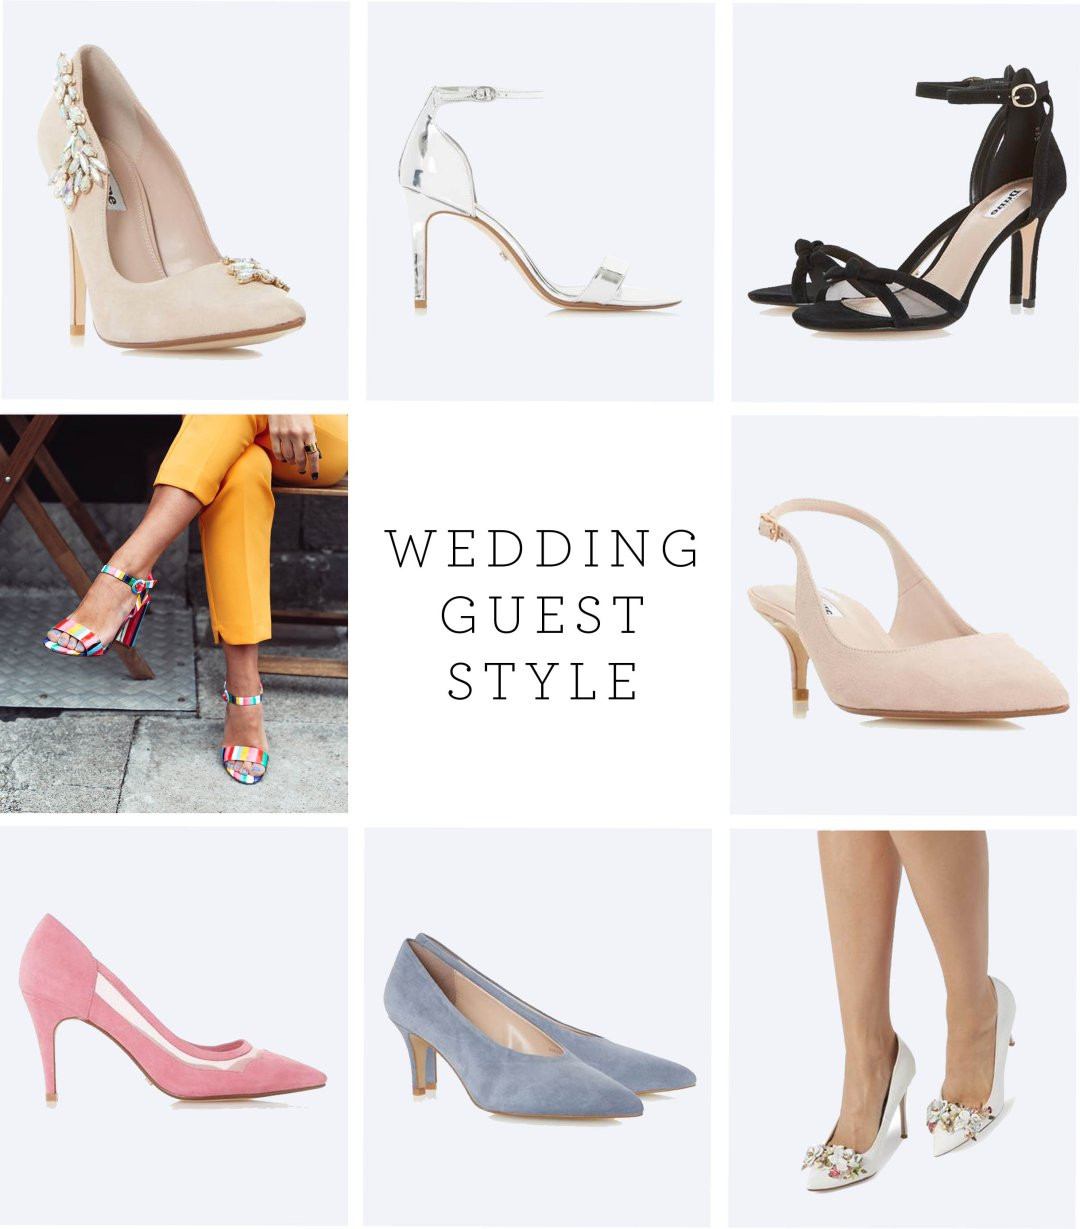 Shoes For Wedding Guest
 La s Wedding Guest Shoes and Sandals